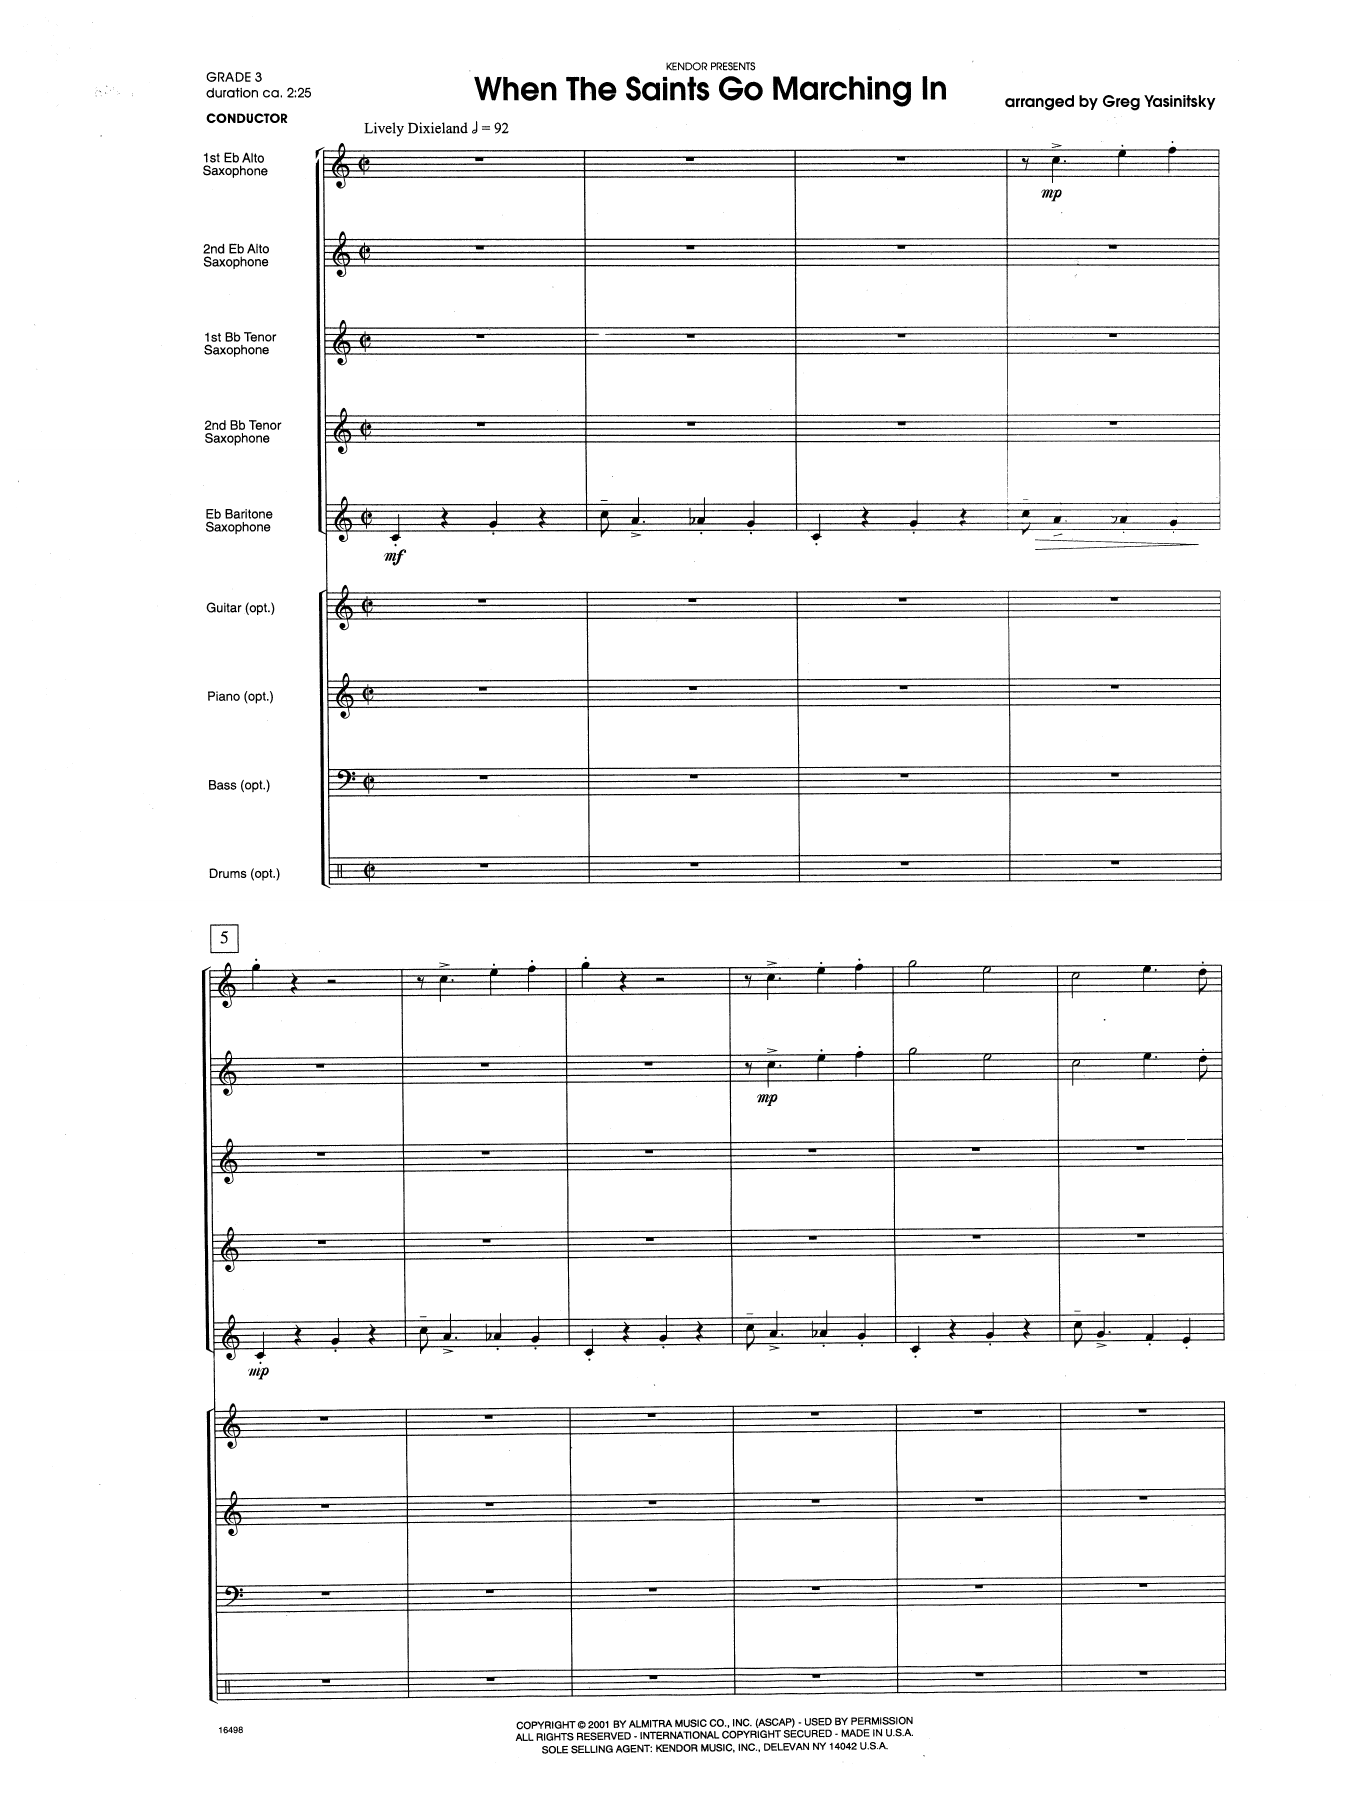 Download Gregory Yasinitsky When the Saints Go Marching In - Full S Sheet Music